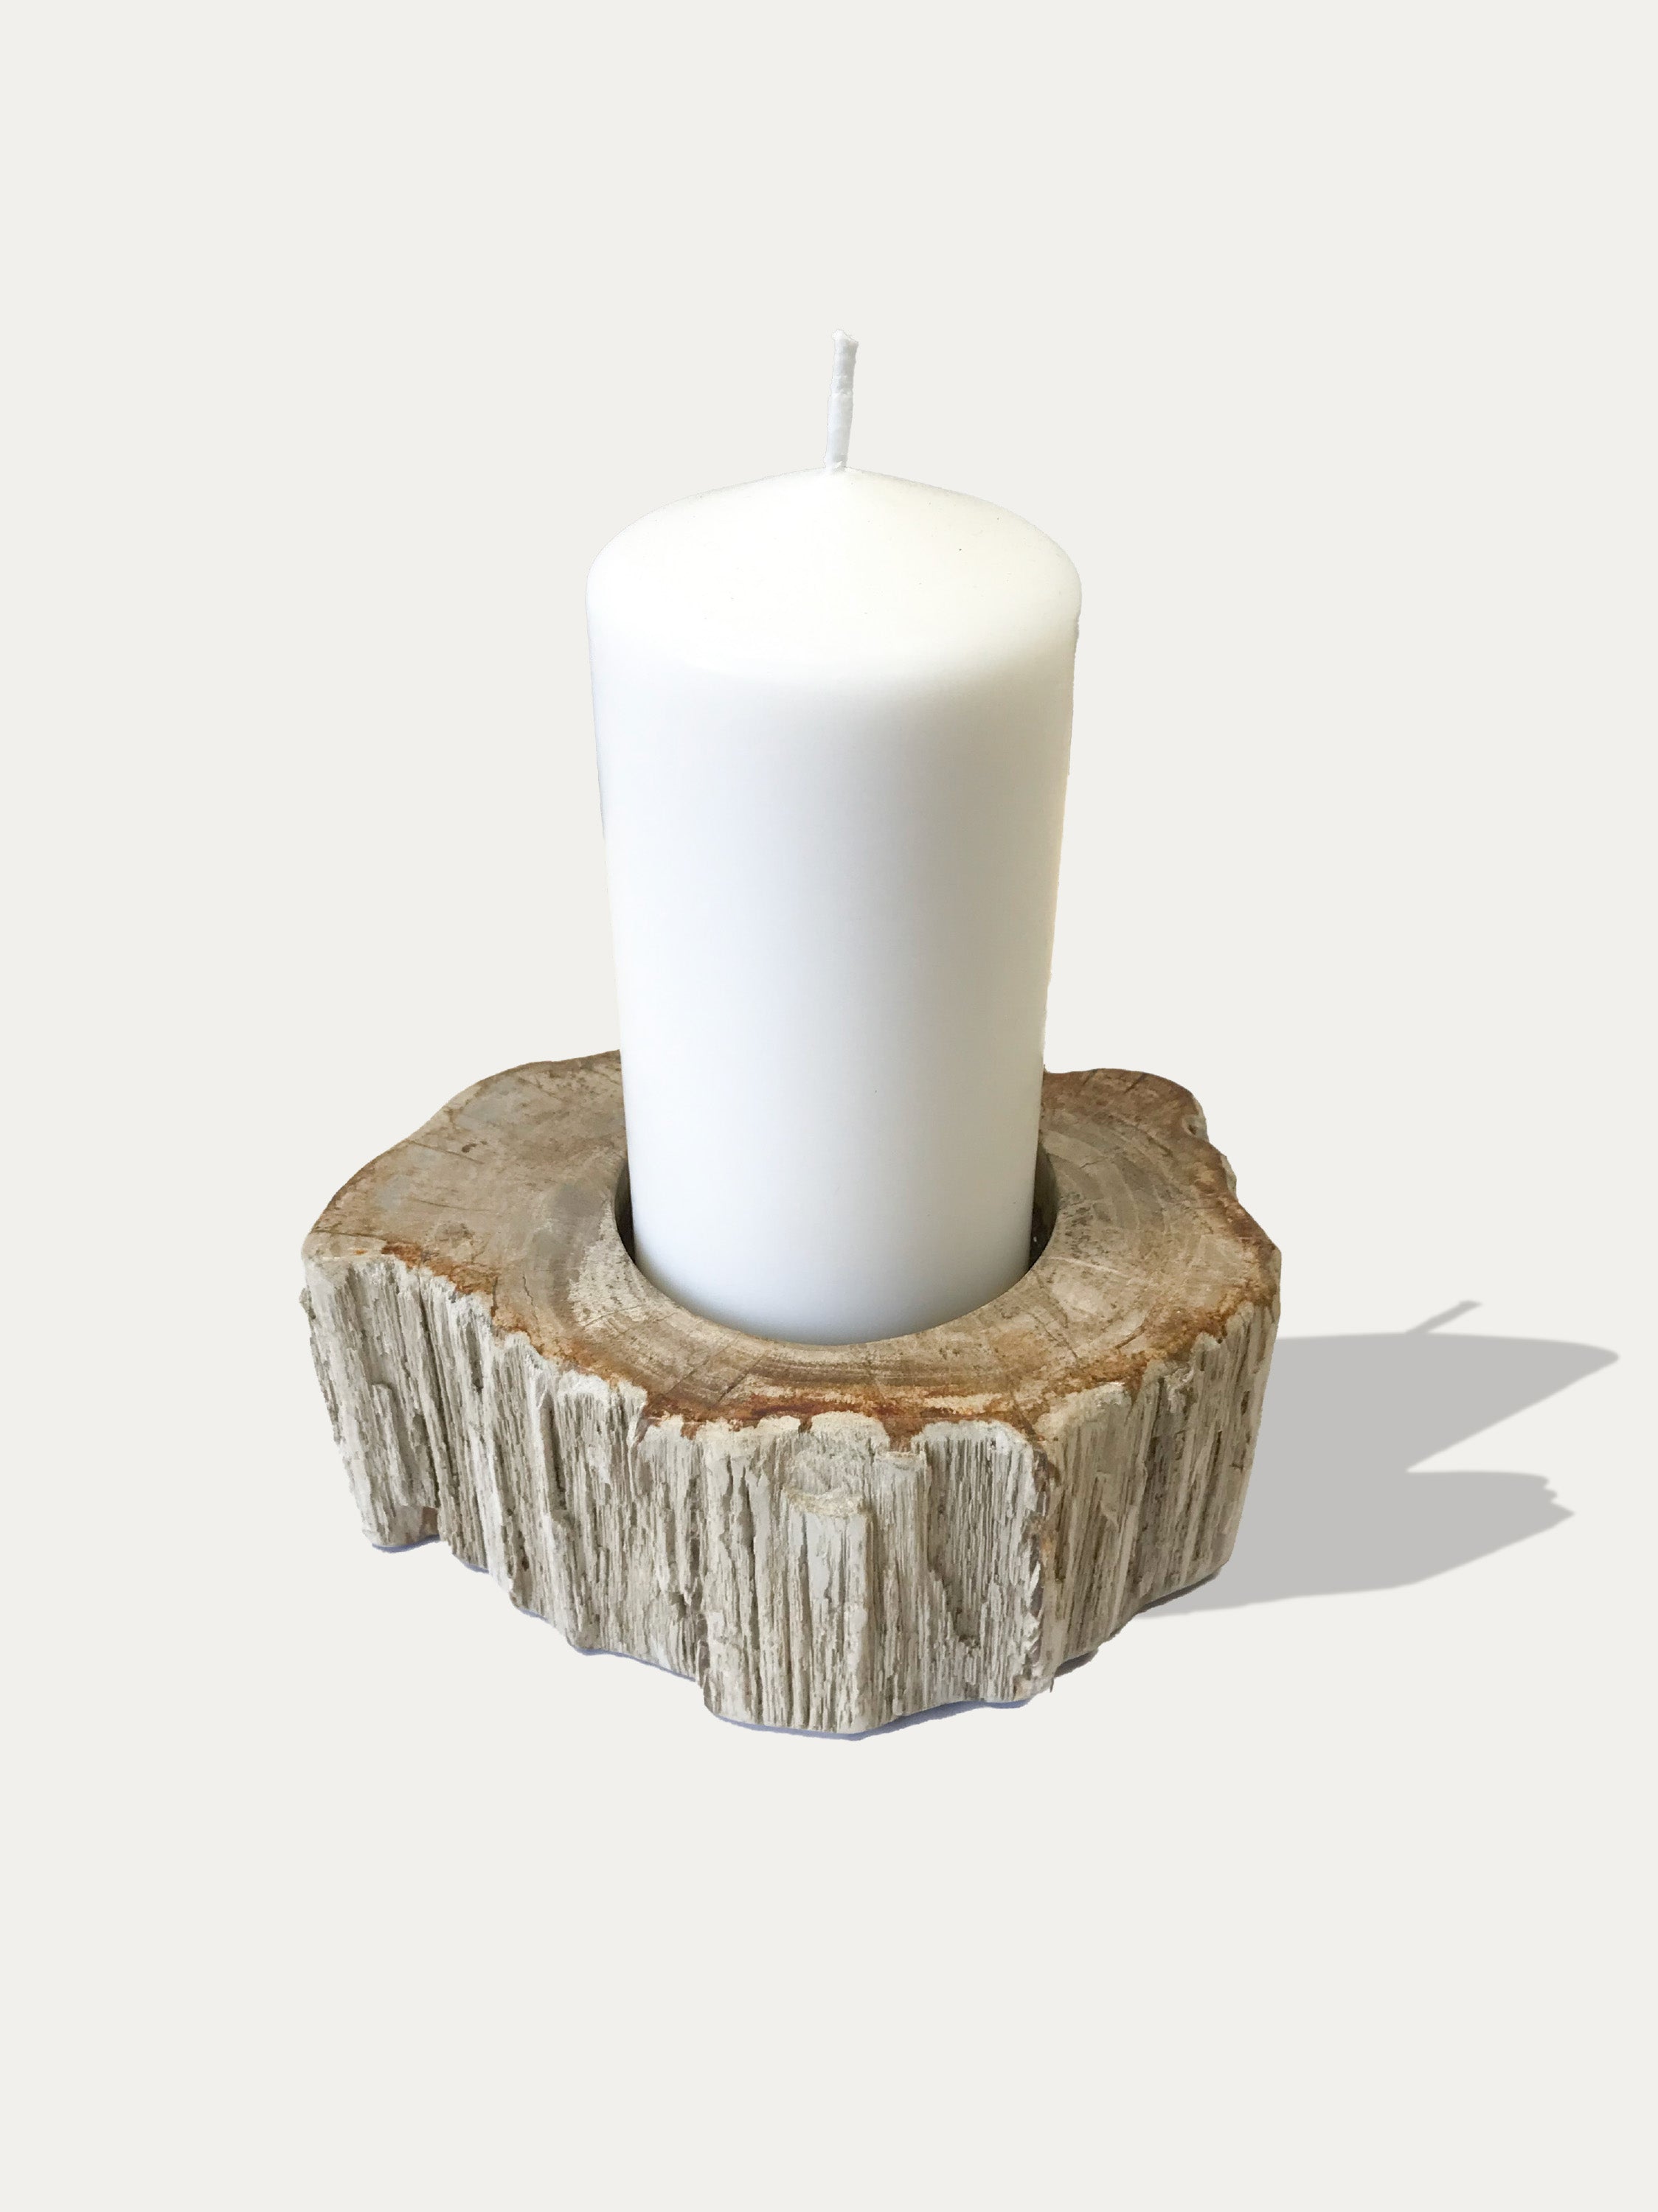 Reversible candle holder in petrified wood